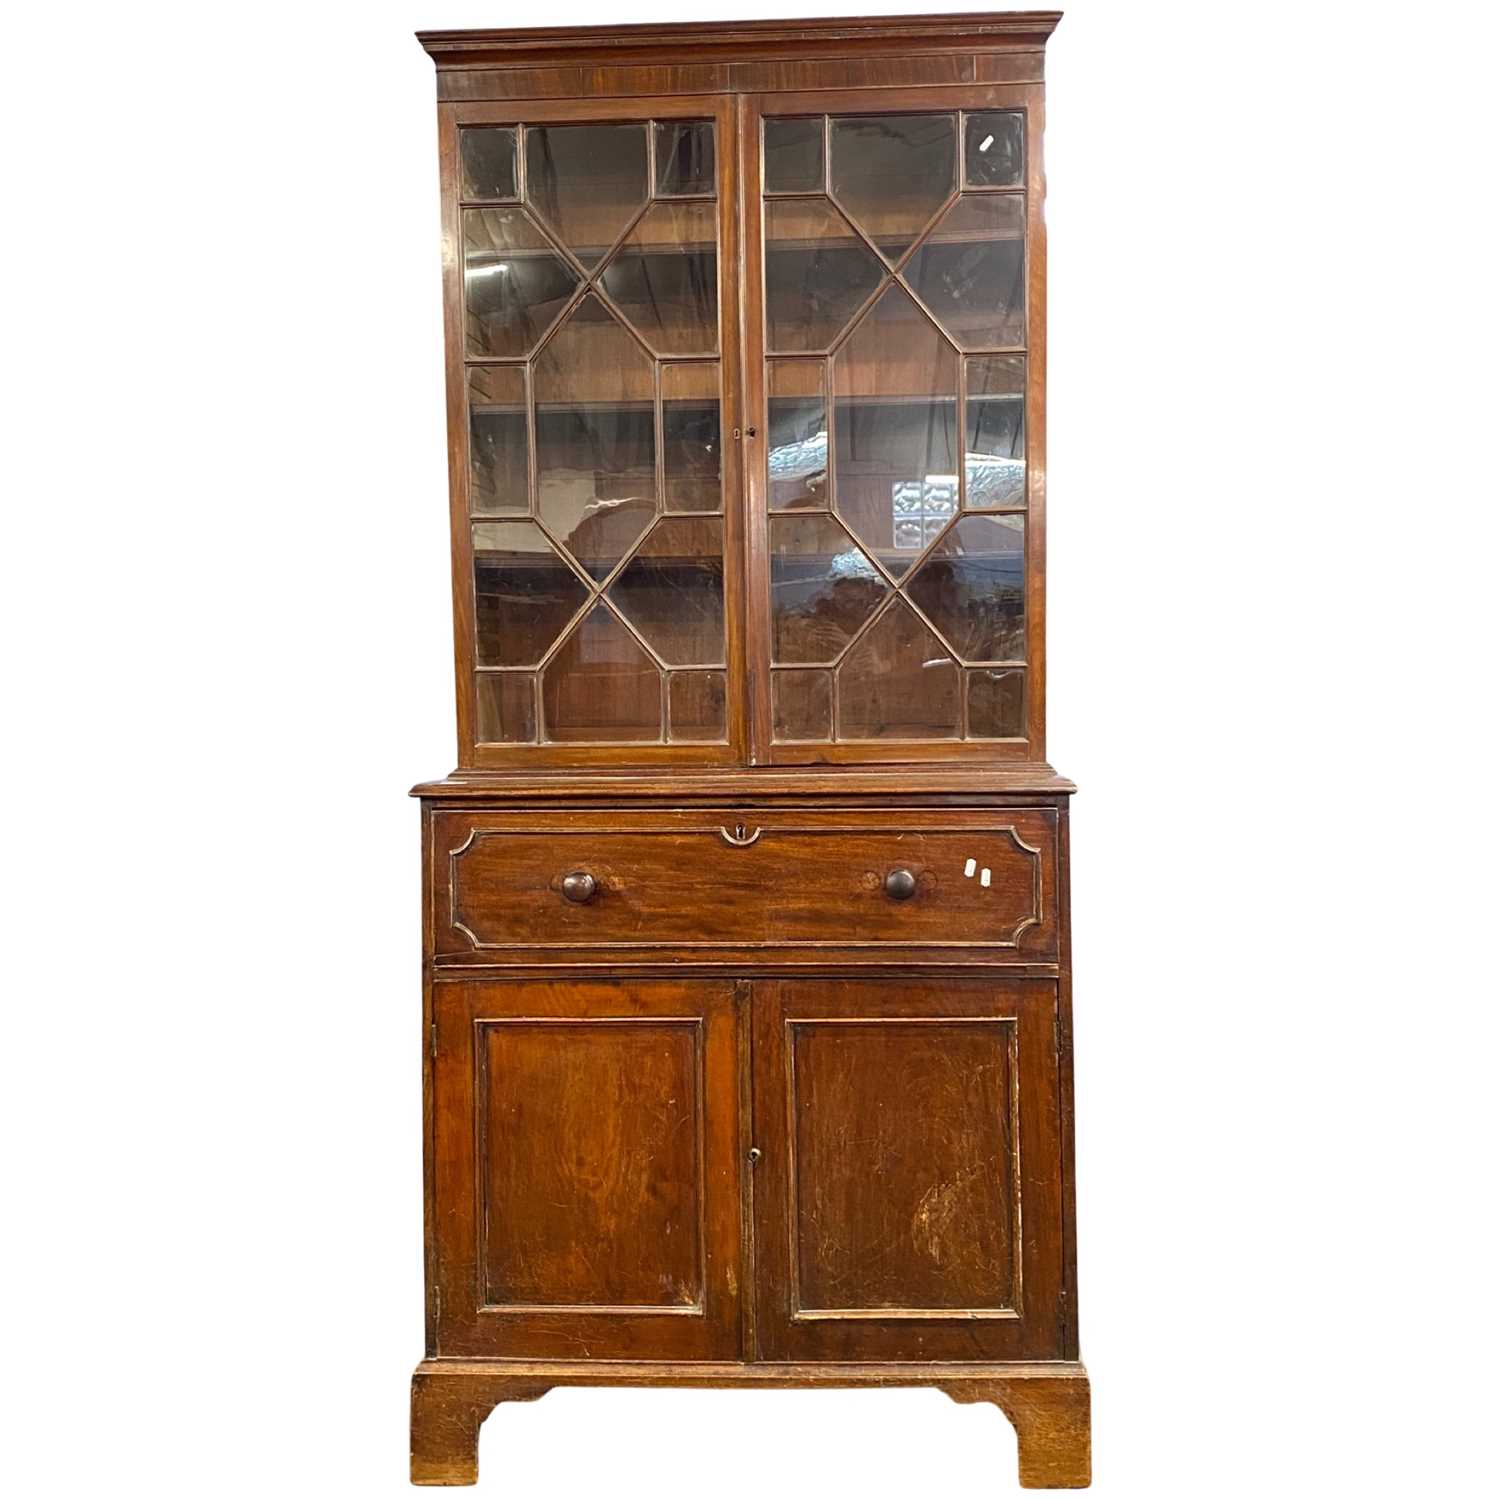 A Georgian mahogany secretaire bookcase cabinet with glazed top section over a base with